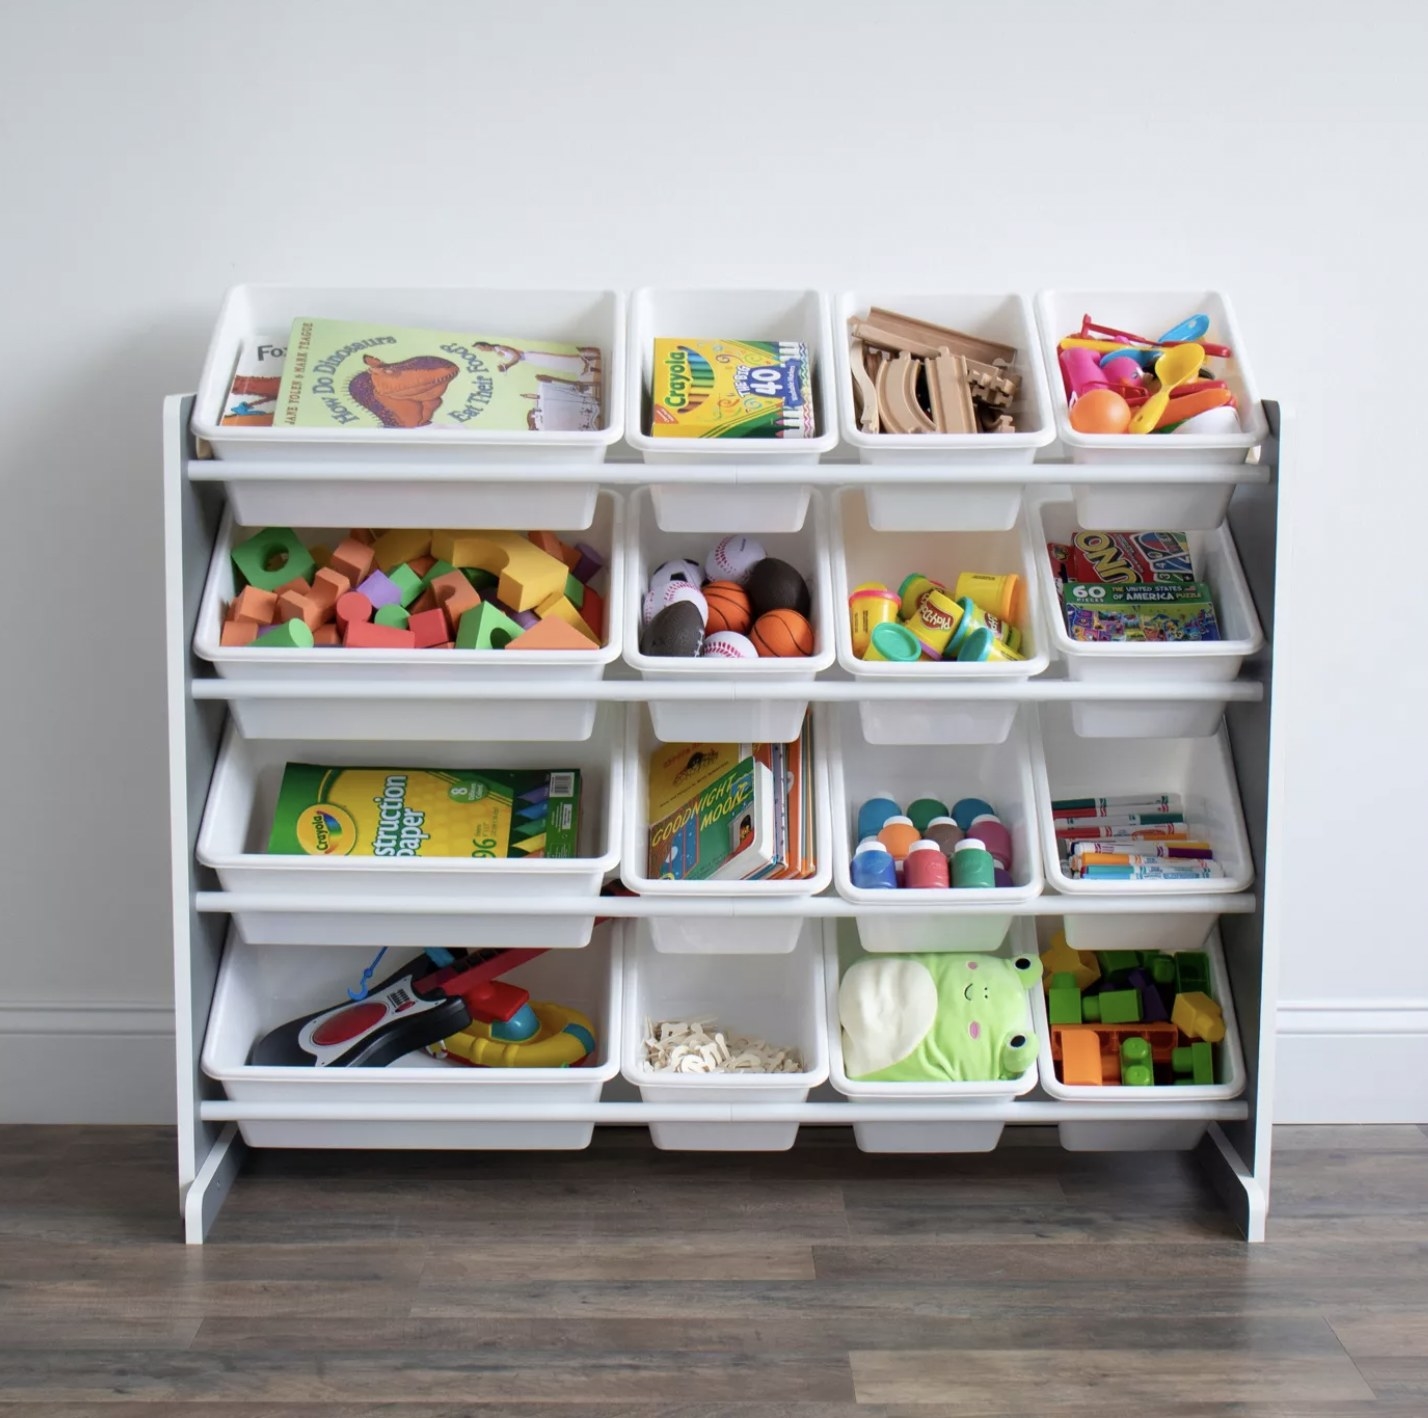 The organizing shelf with 16 white bins filled with toys